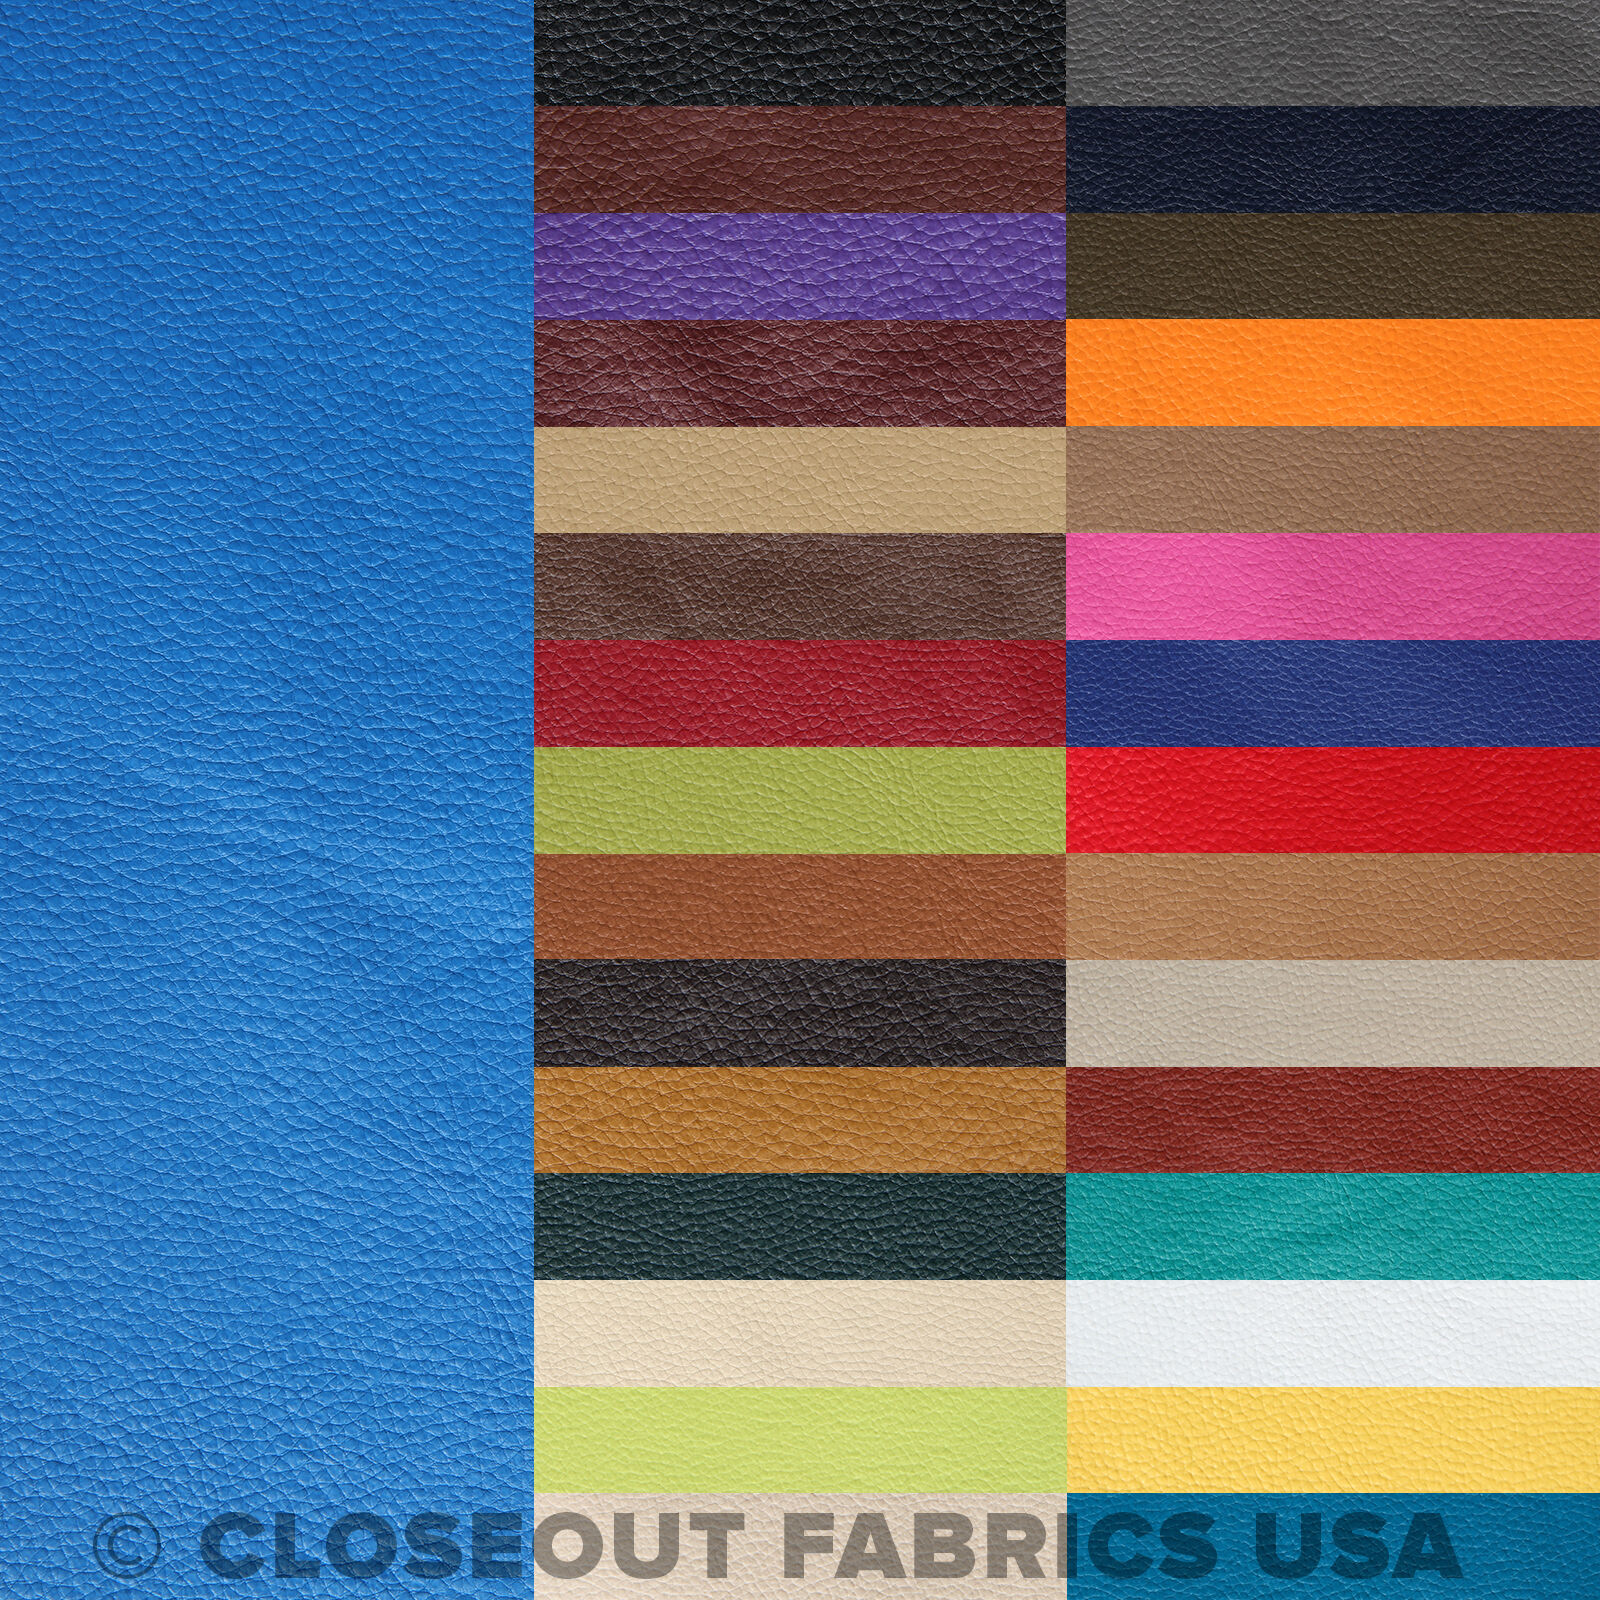 Vinyl Fabric - Faux Leather Pleather Fabric - Upholstery Fabric - 30 Colors